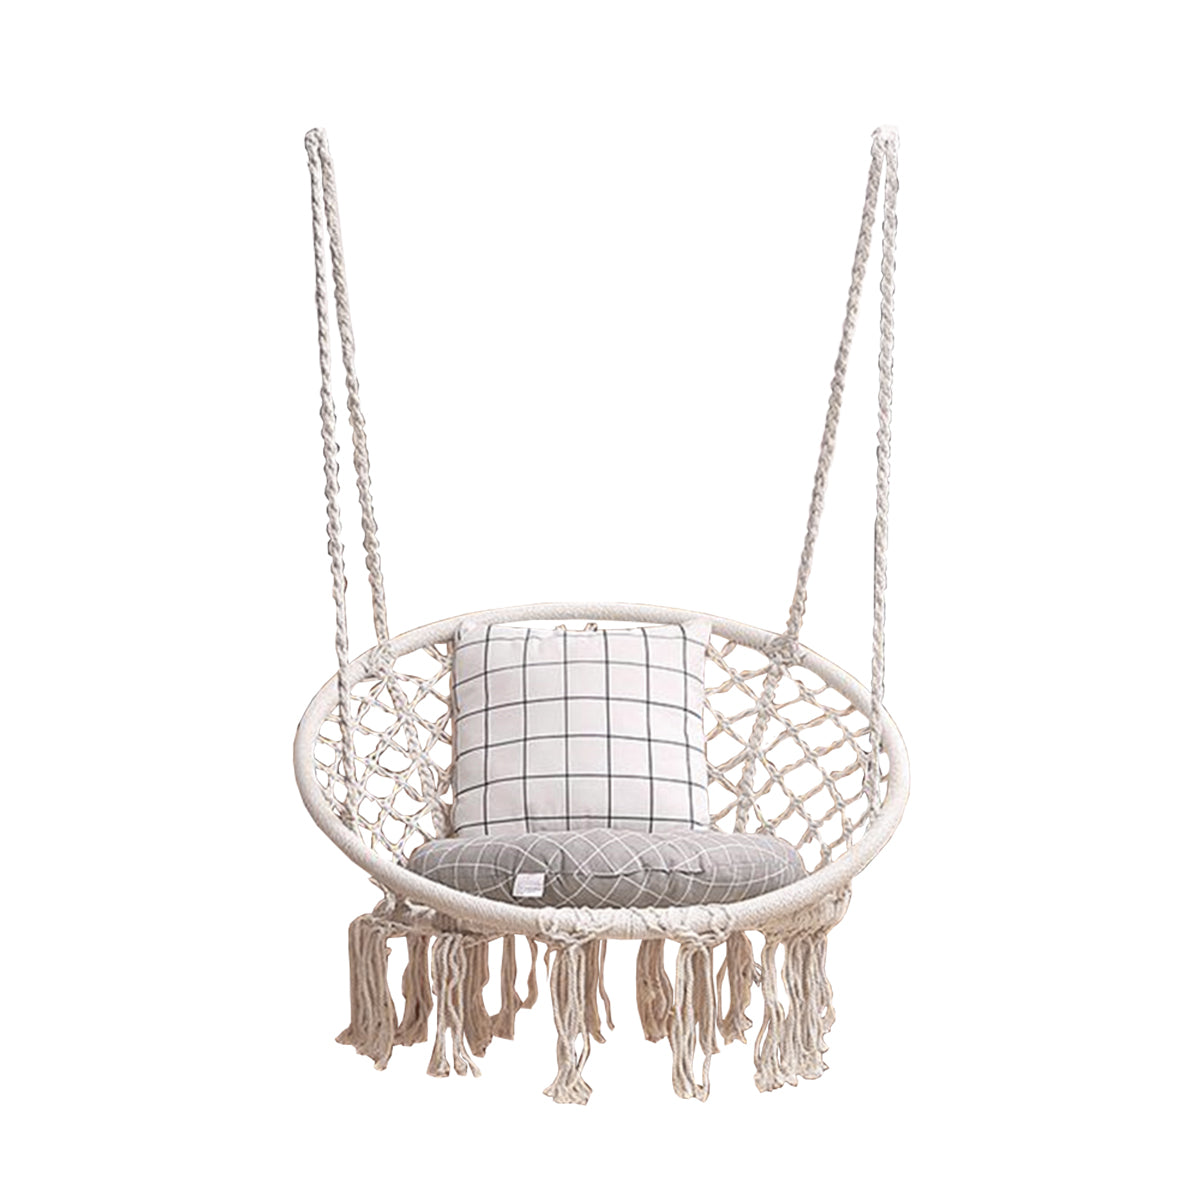 Hammock Chair Hanging Chair Swing with Stand with Heavy Duty Hanging Hardware Kit, Indoor Macrame Swing Chairs 100% Cotton Rope for Bedrooms